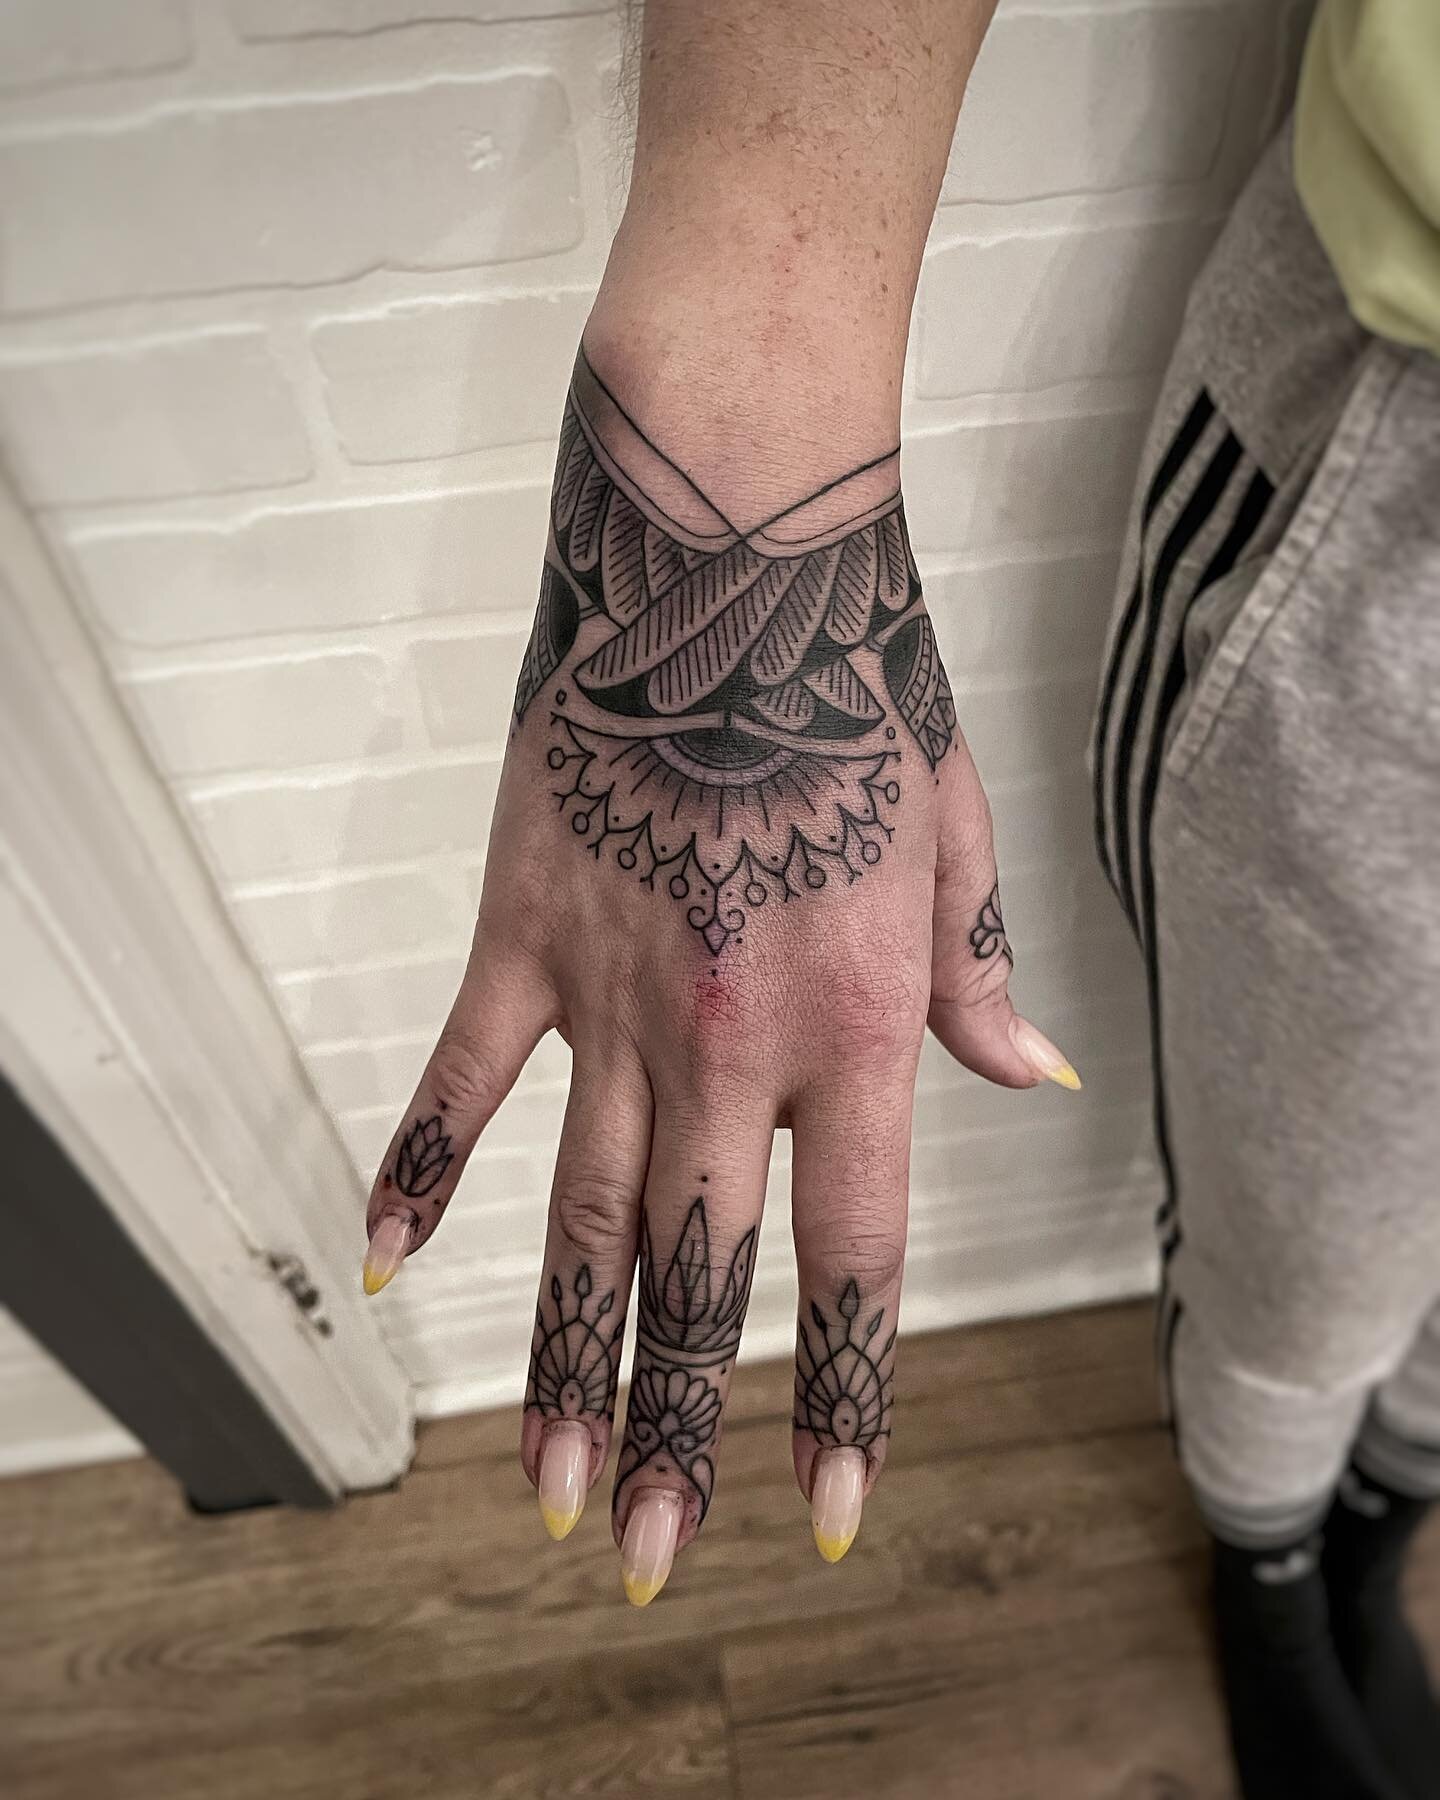 Thank you Saira!! 

So much fun to make this hand adornment inspired by Egyptian design. It&rsquo;s a treat to see clients through the years and be able to bask in the growth and evolution of each incredible being. 

Always grateful